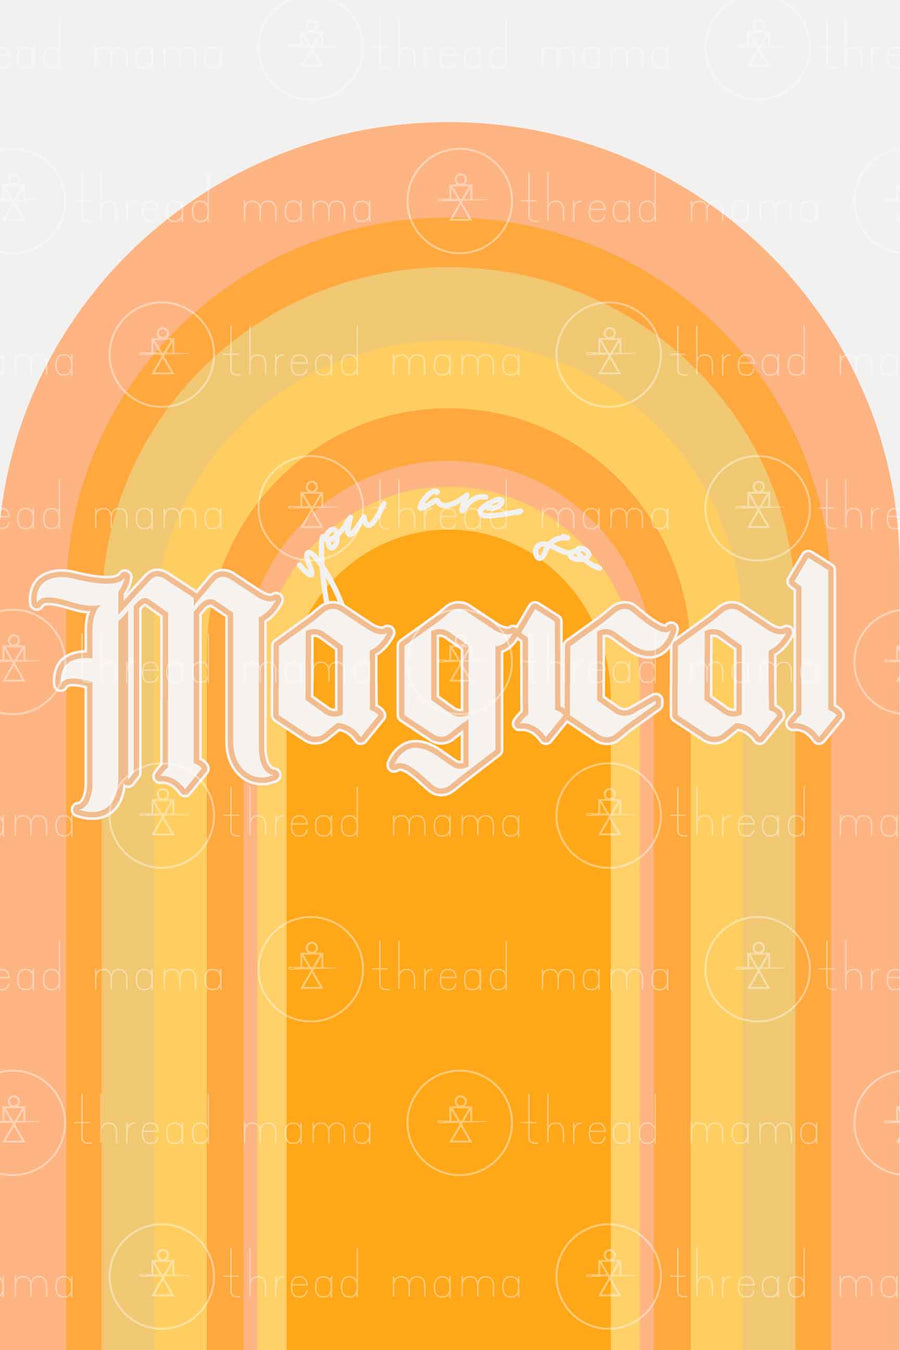 You are so Magical - 2 colors included (Printable Poster)